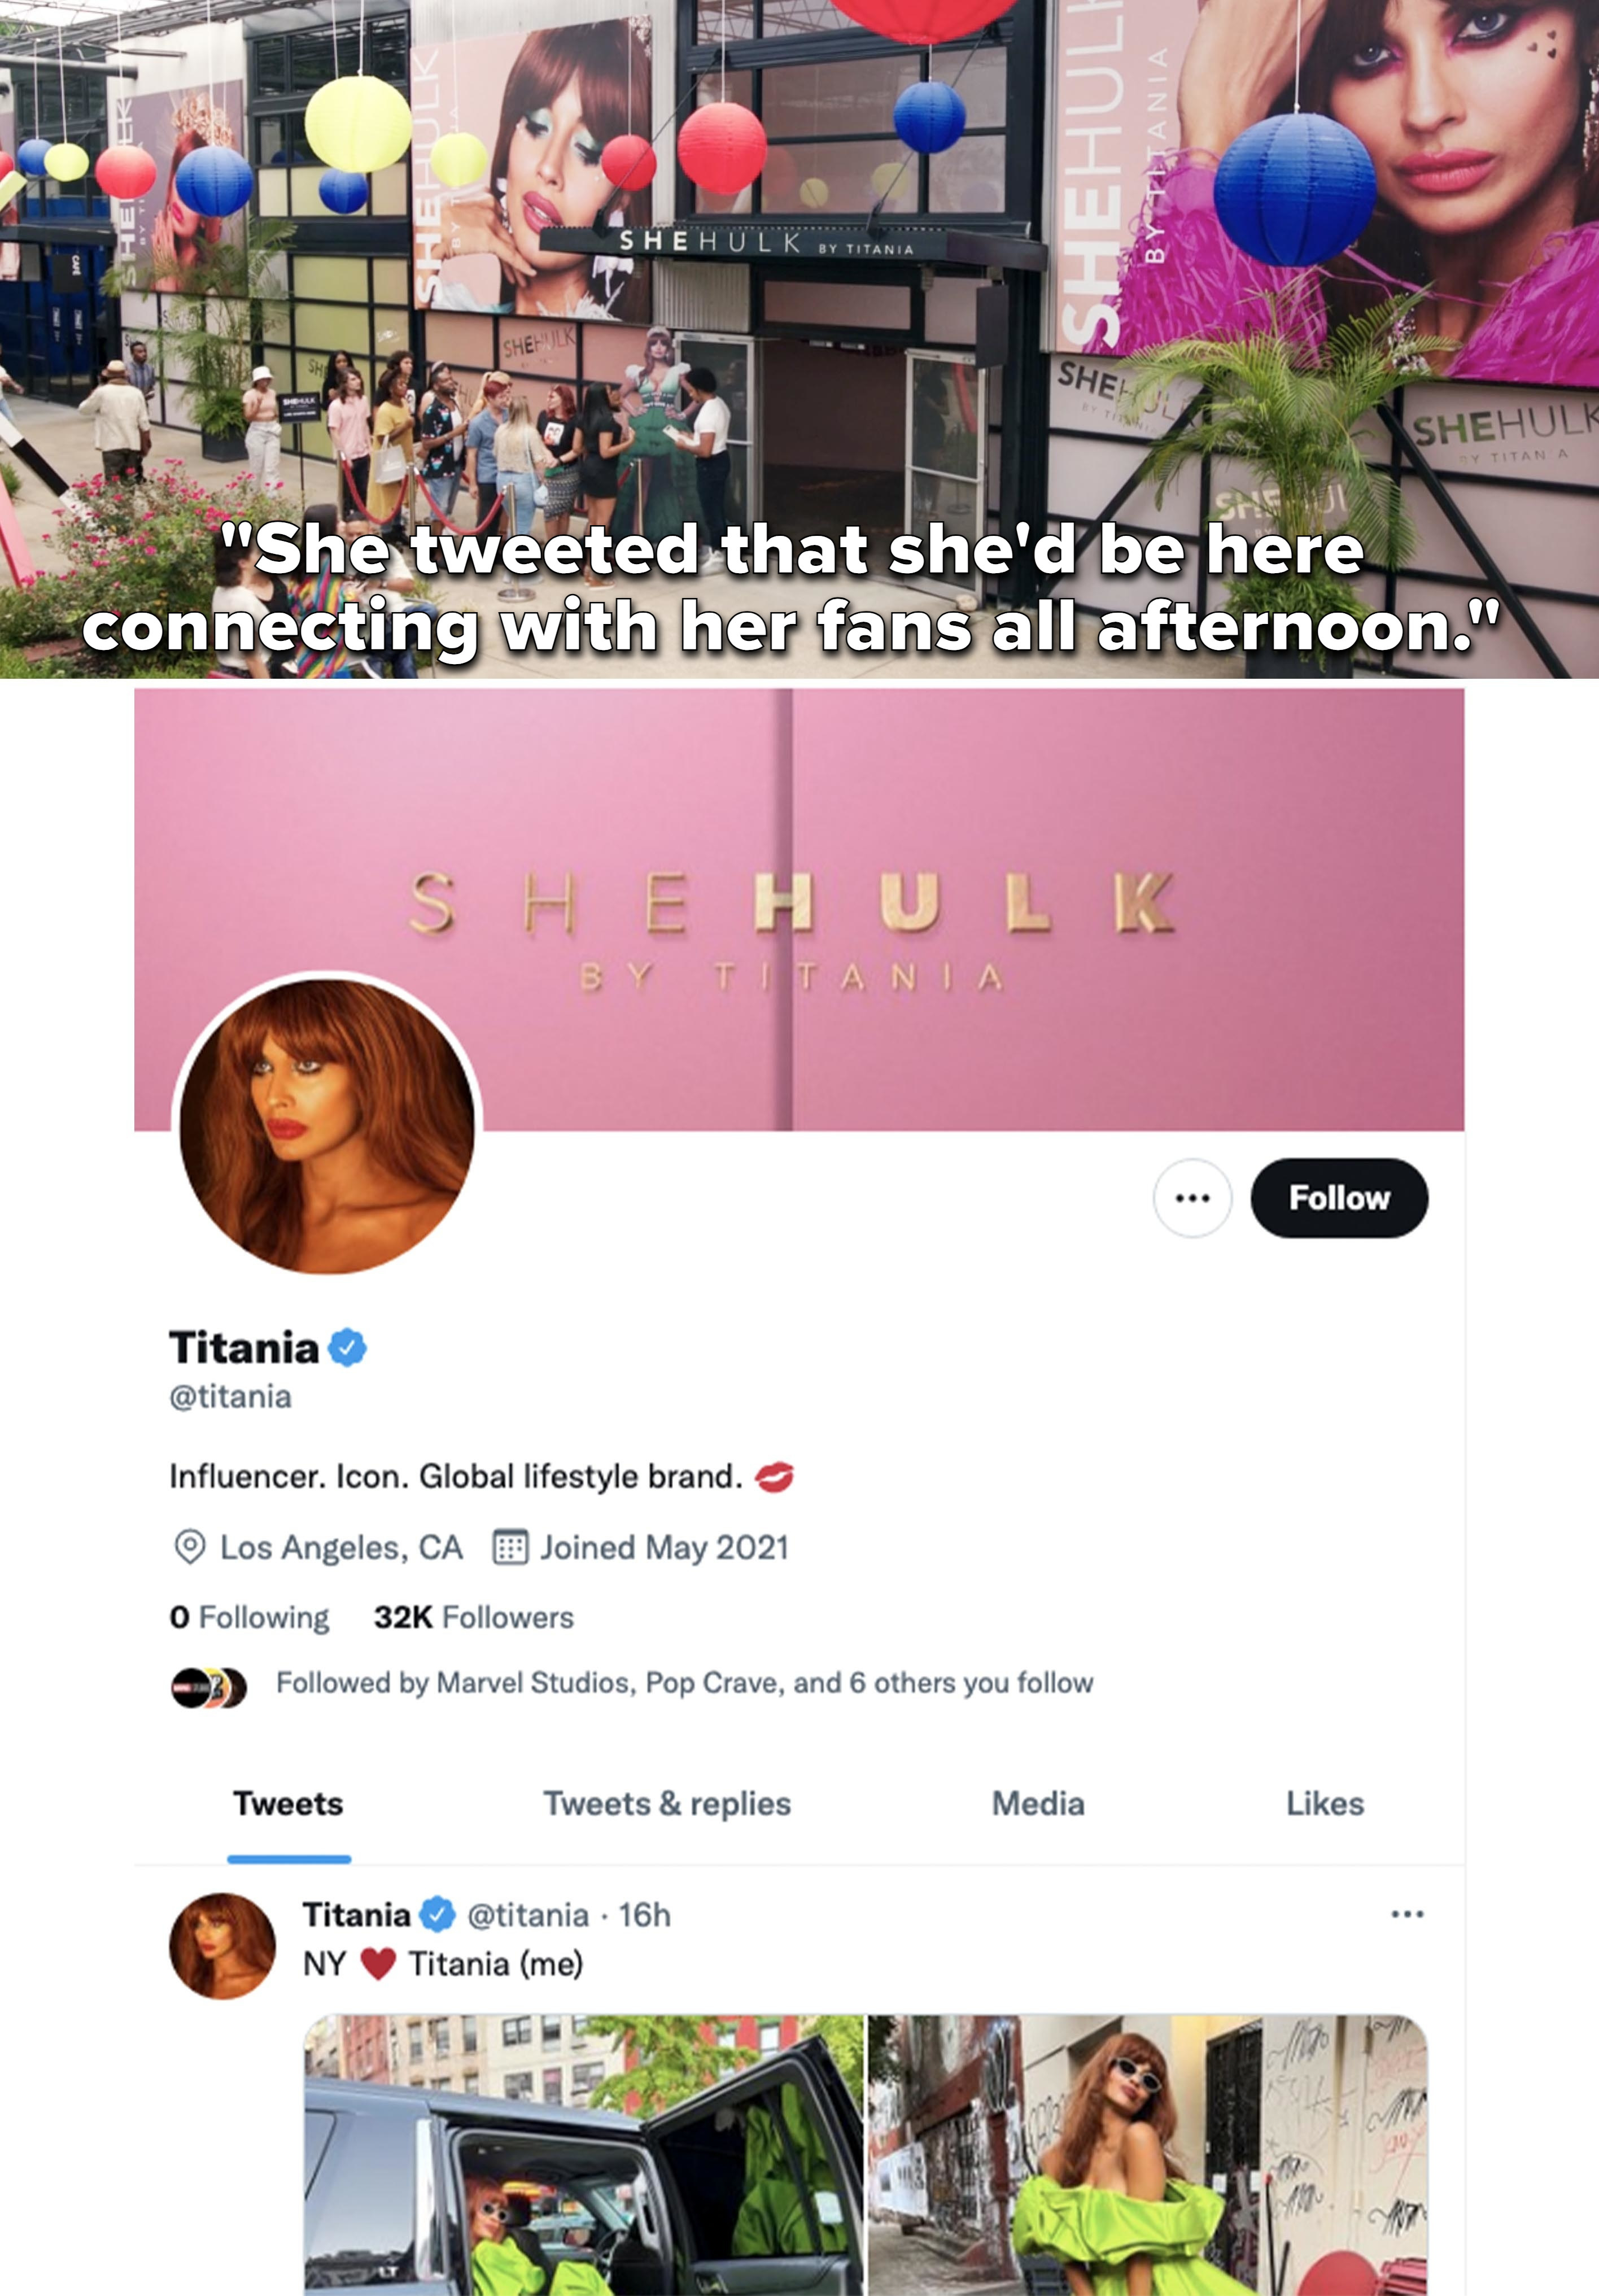 A screenshot of a real-life Twitter account for the character Titania